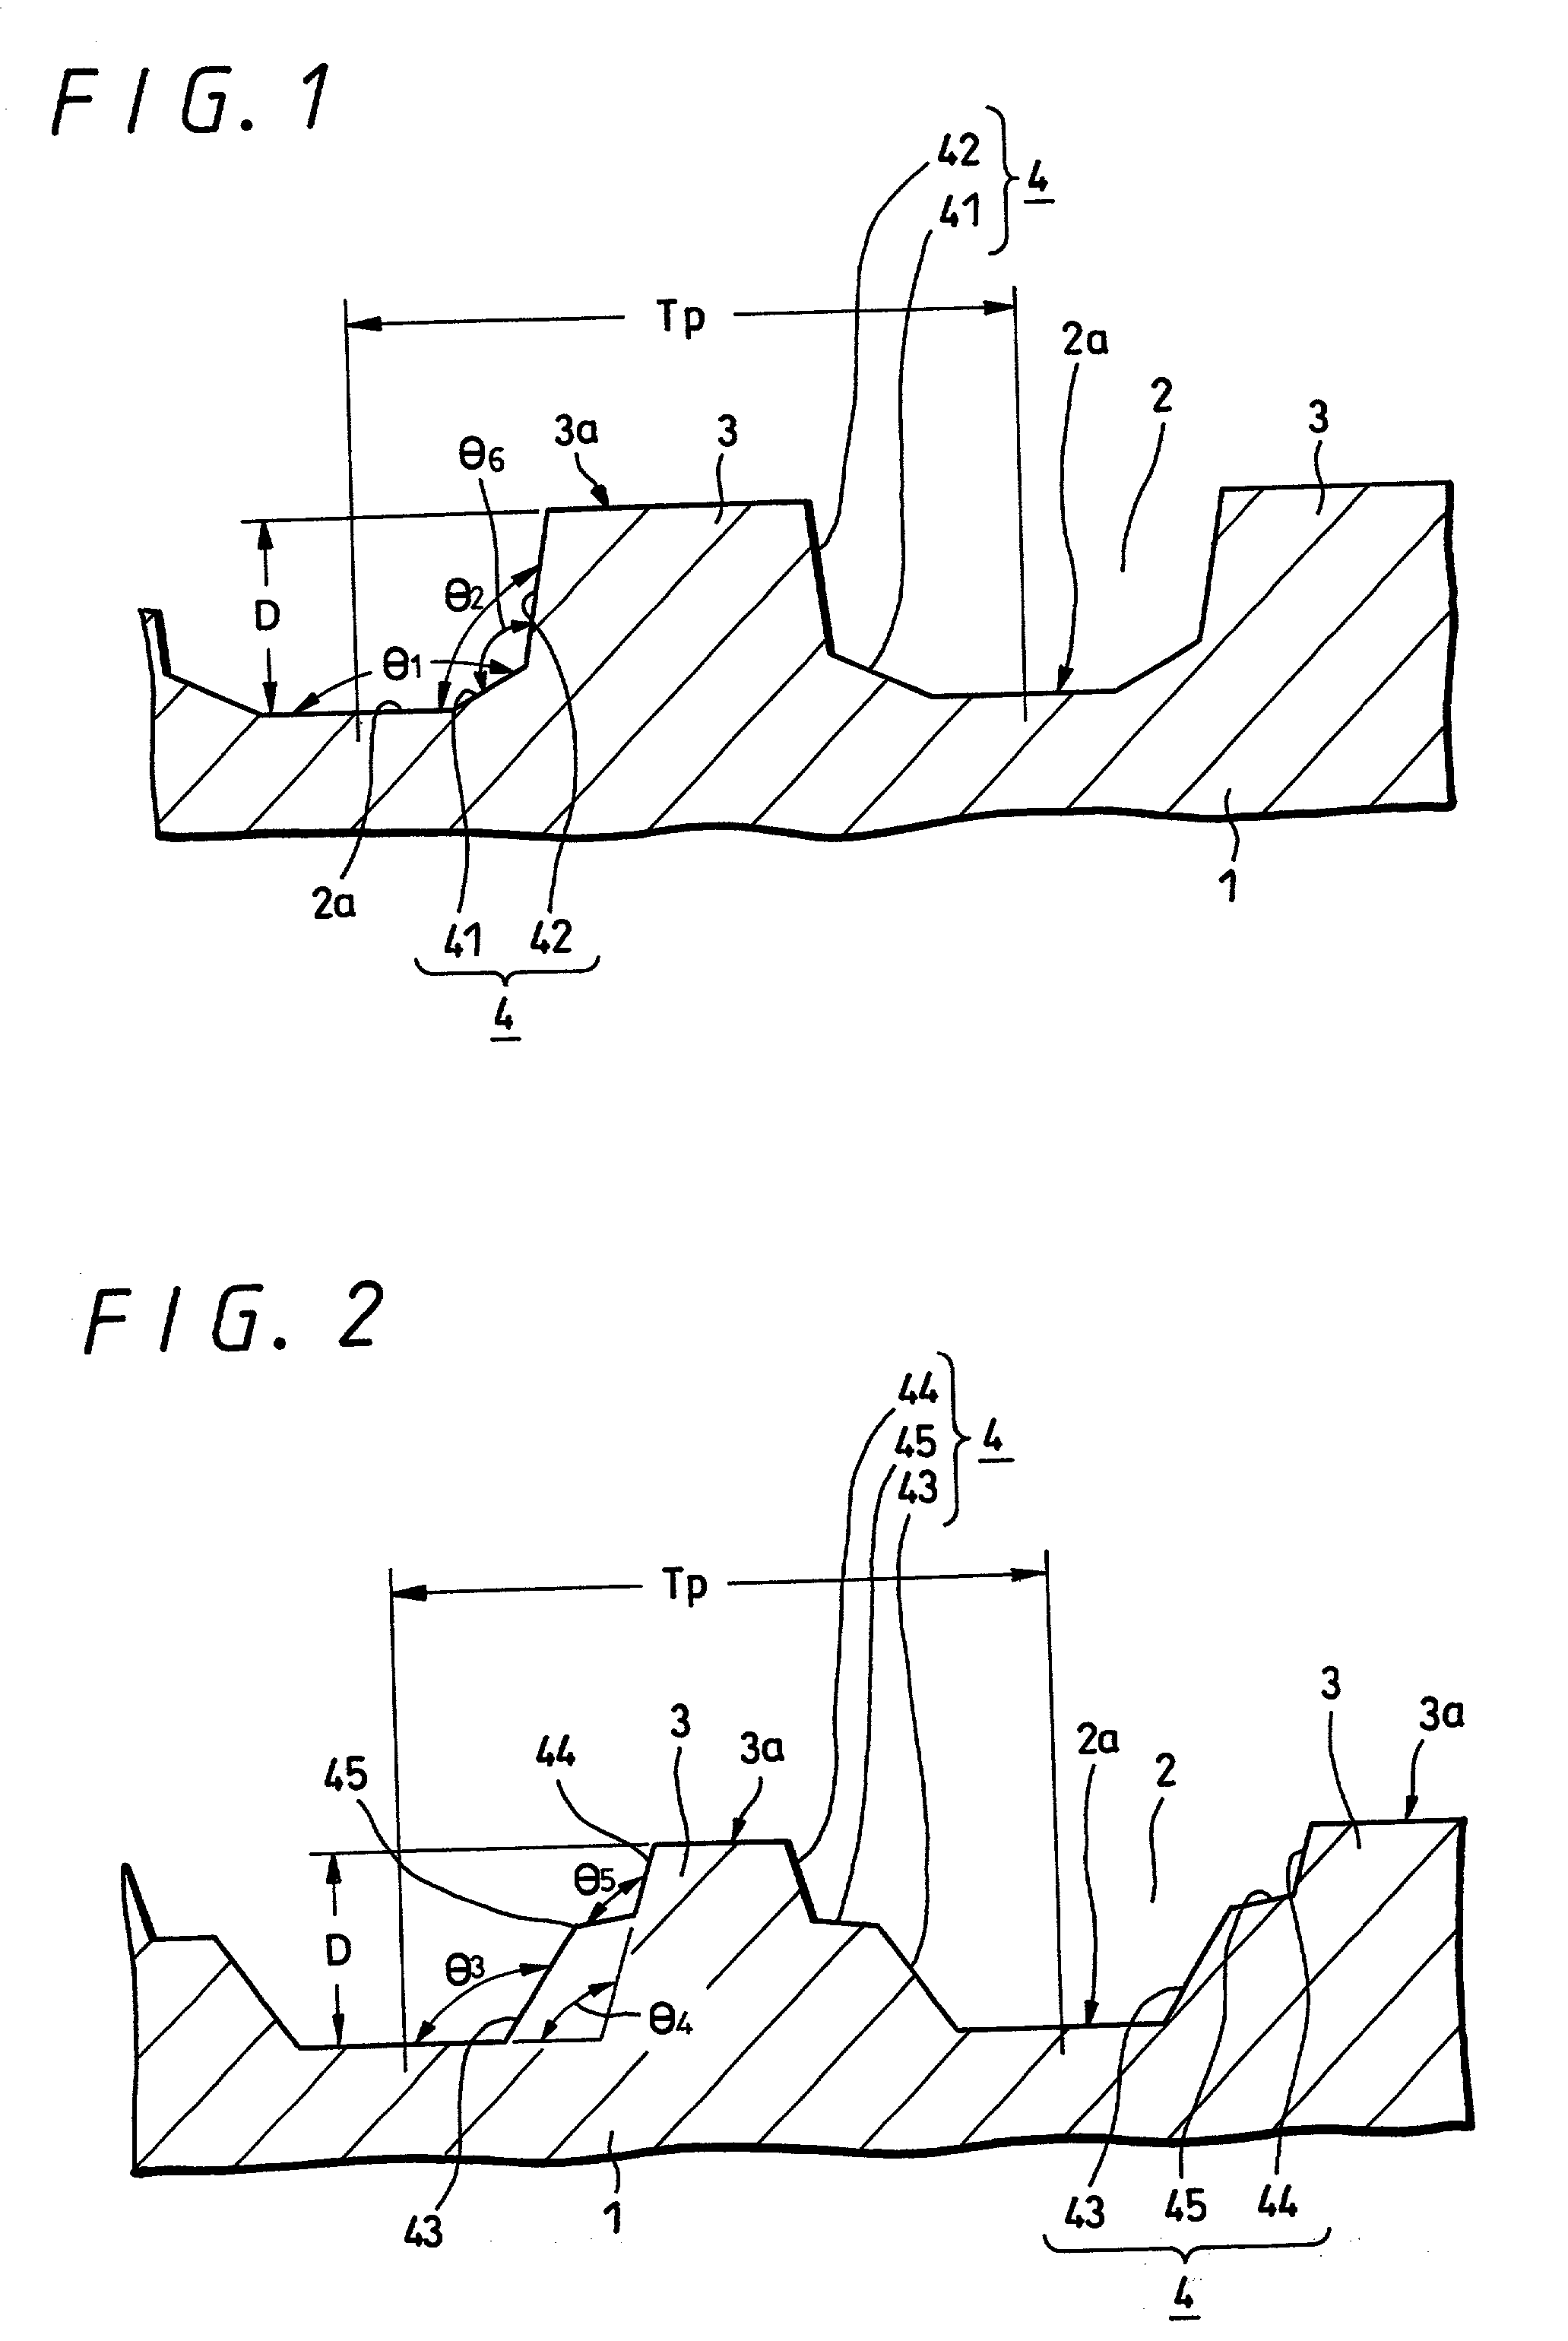 Substrate for optical recording media, optical recording medium, manufacturing process for optical recording media, and optical recording/reproducing method